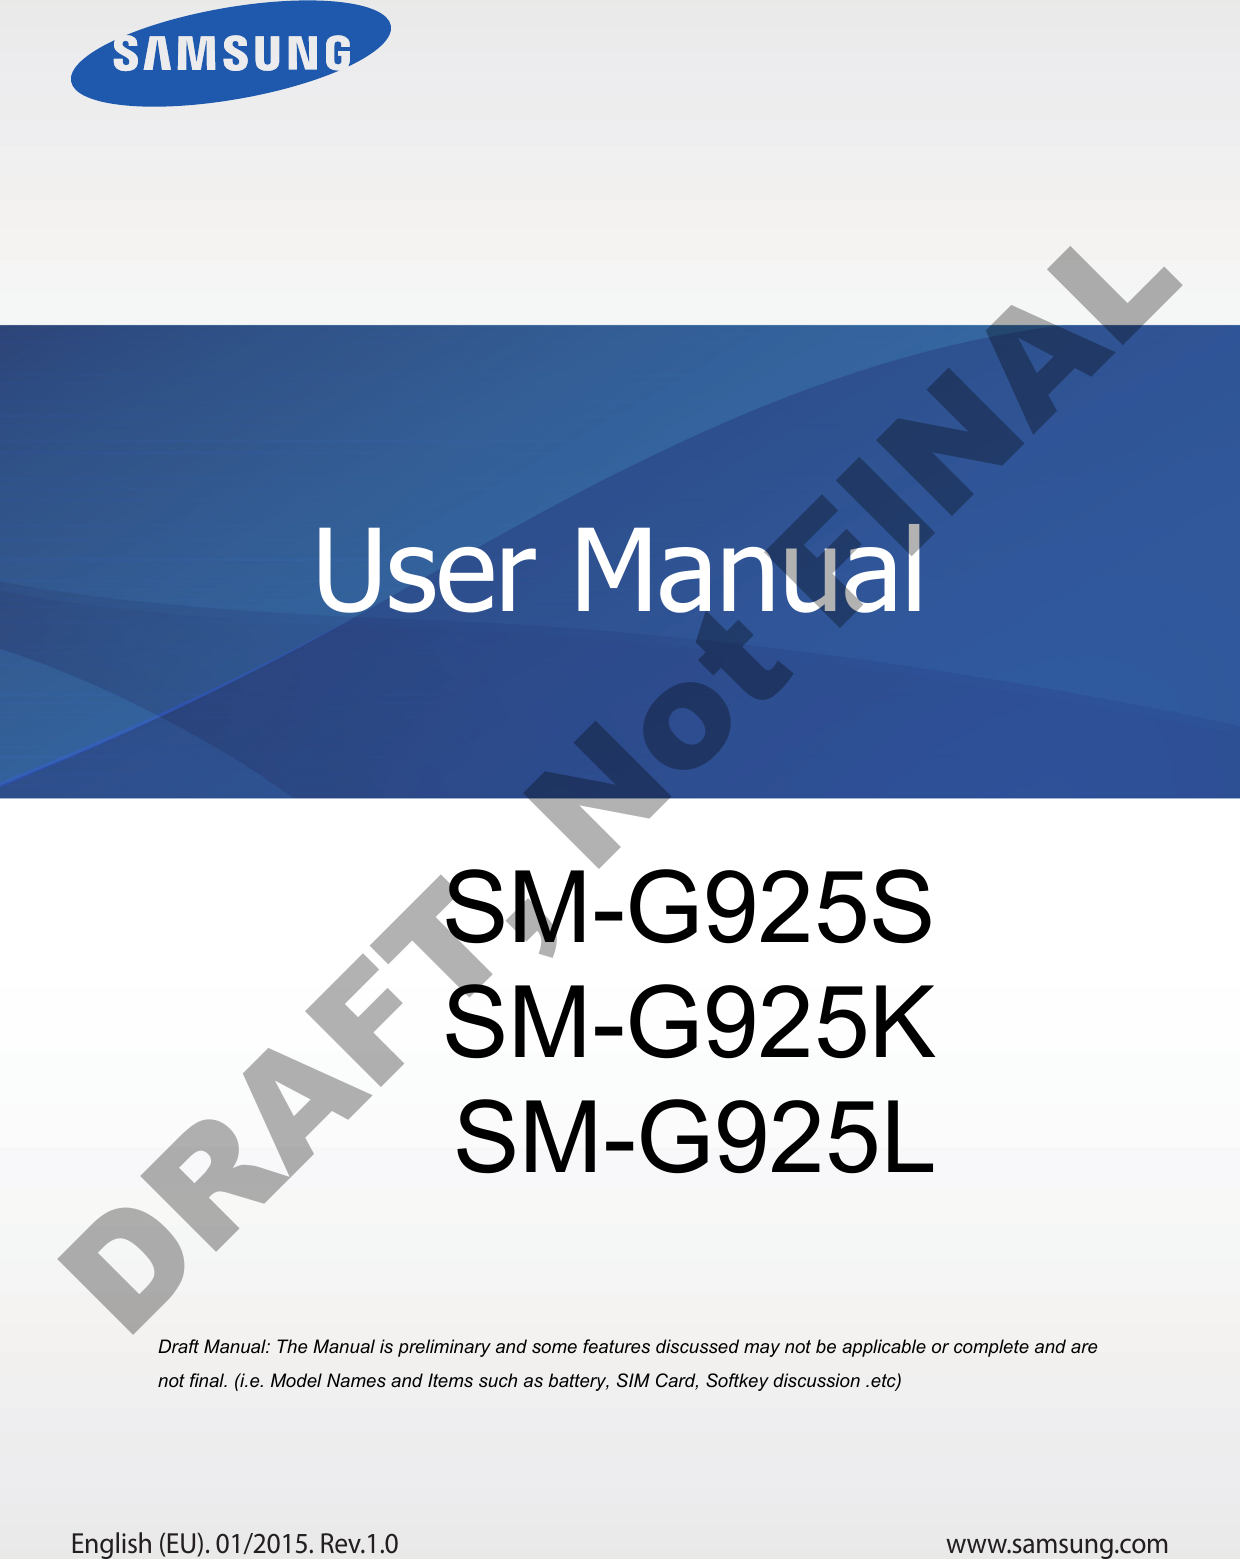 www.samsung.comUser ManualEnglish (EU). 01/2015. Rev.1.0Draft Manual: The Manual is preliminary and some features discussed may not be applicable or complete and are not final. (i.e. Model Names and Items such as battery, SIM Card, Softkey discussion .etc) SM-G925S SM-G925K SM-G925L DRAFT, Not FINAL